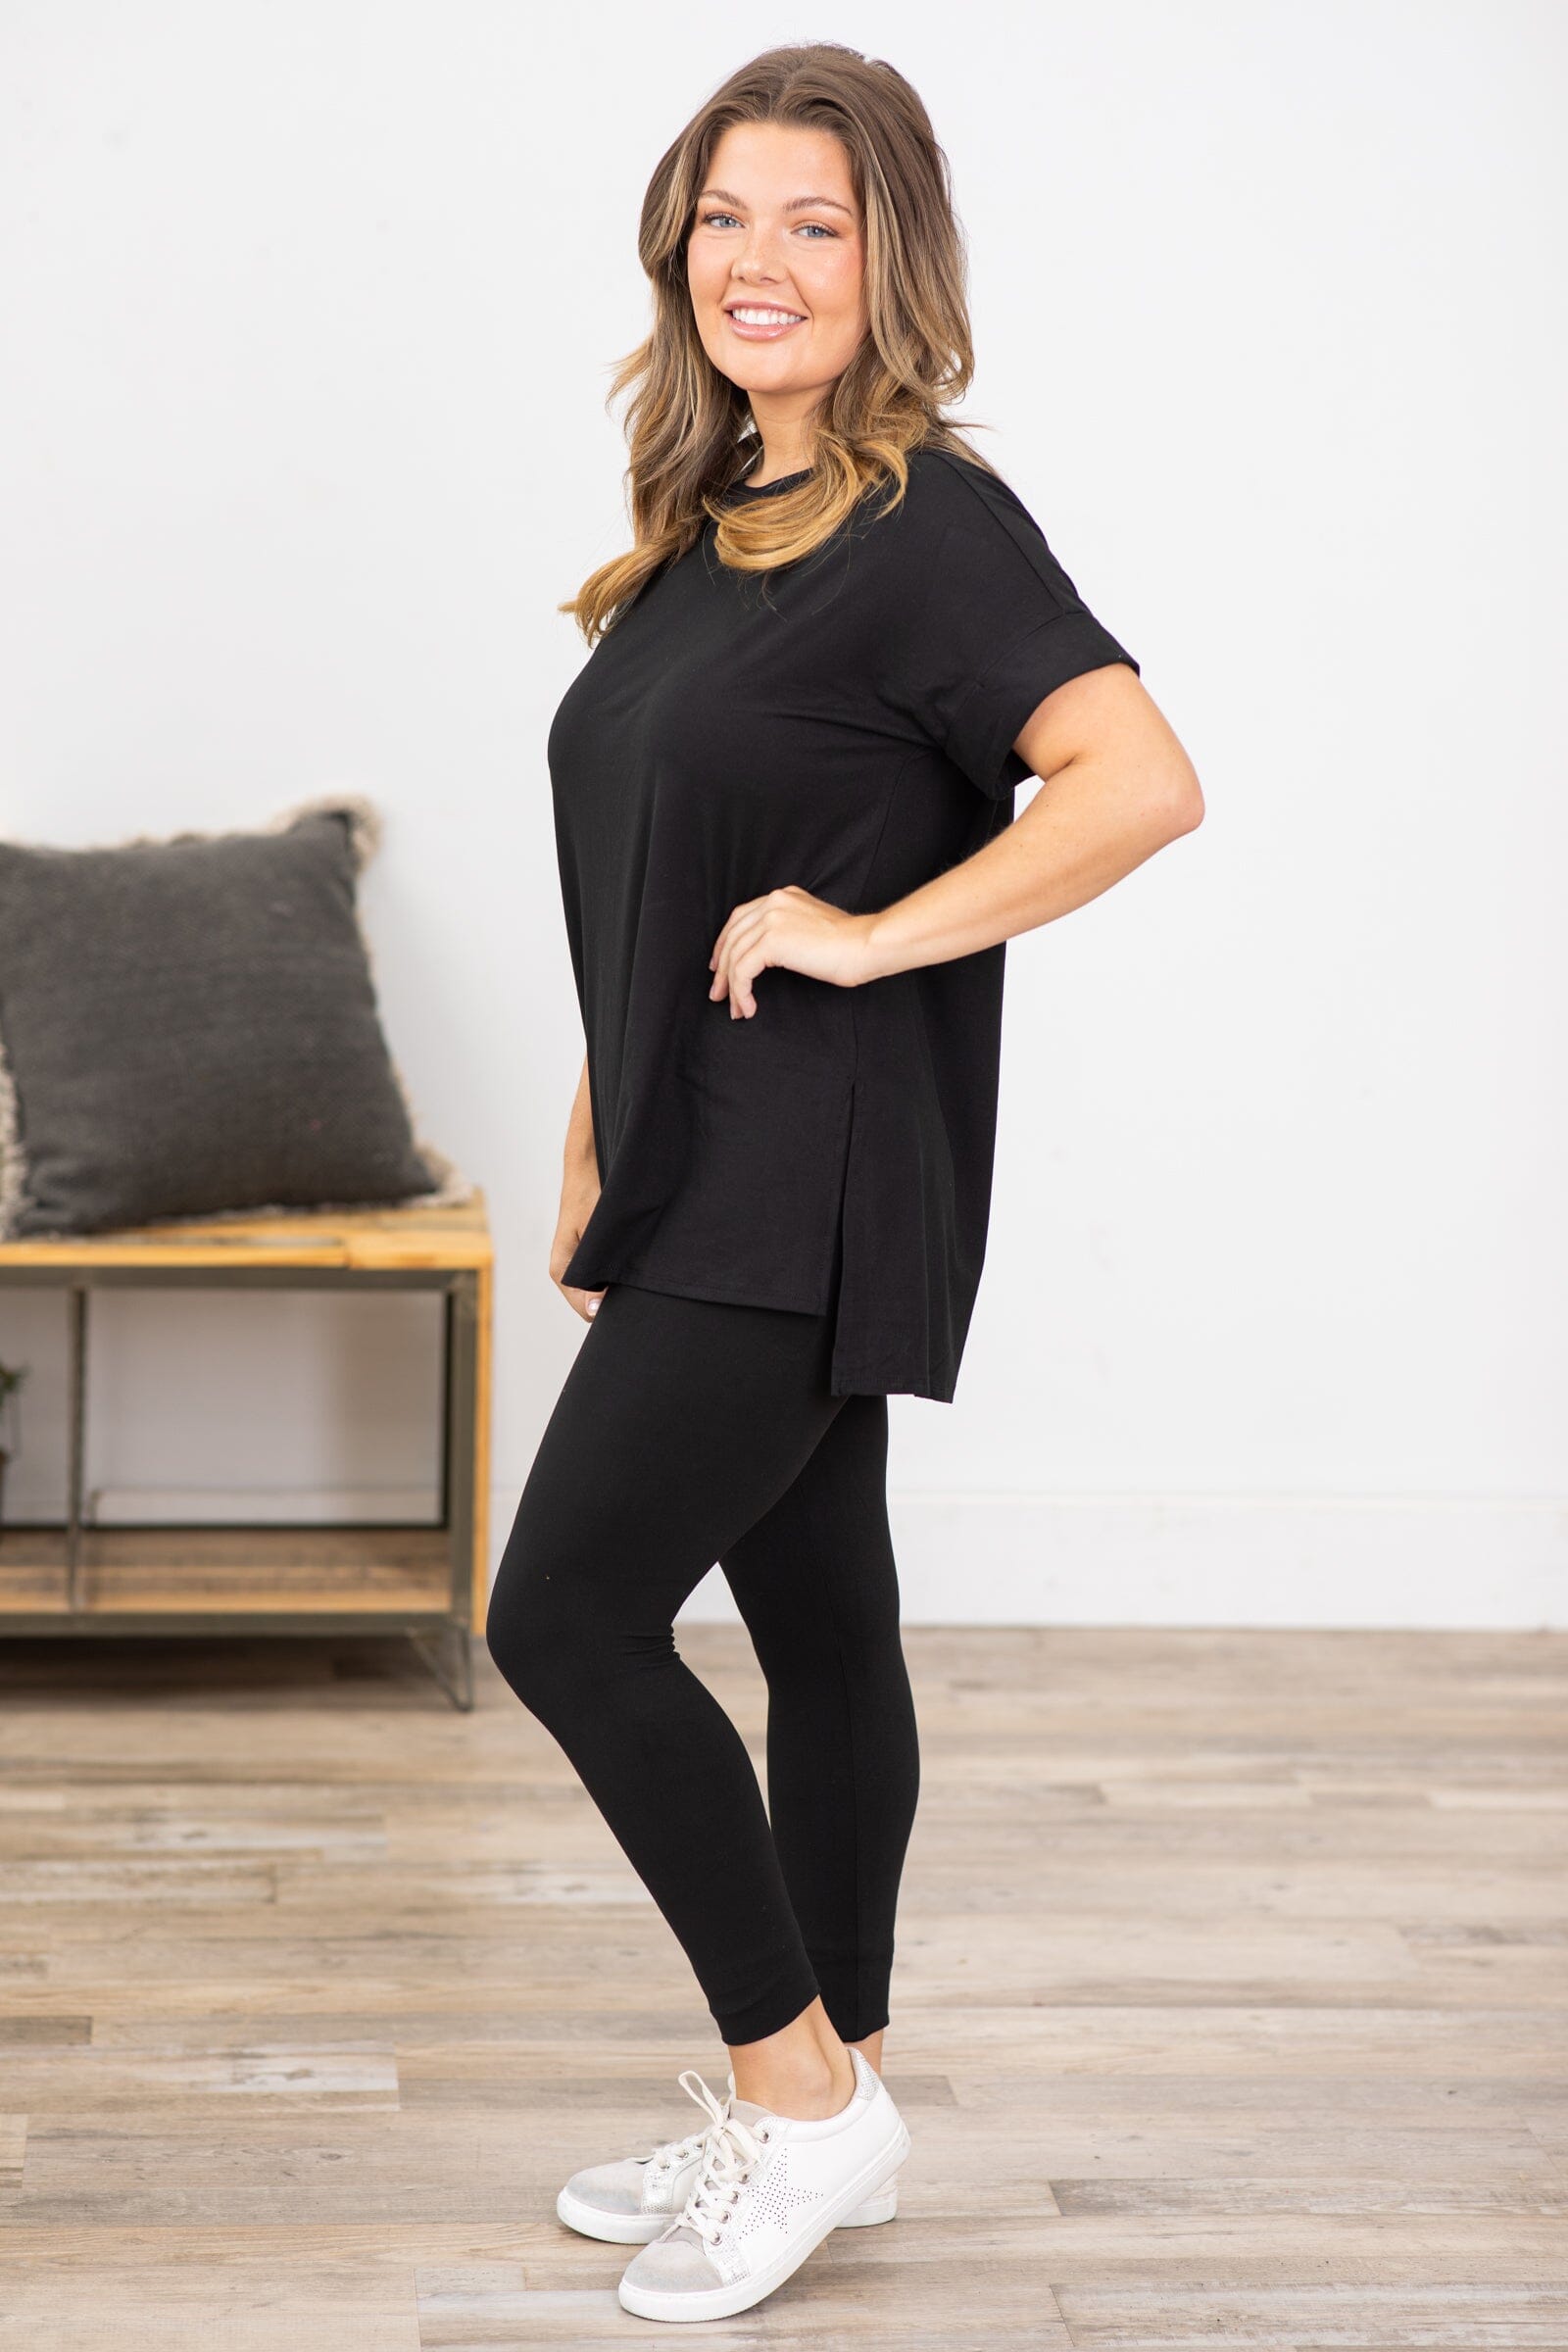 Black Short Sleeve Top and Legging Set - Filly Flair